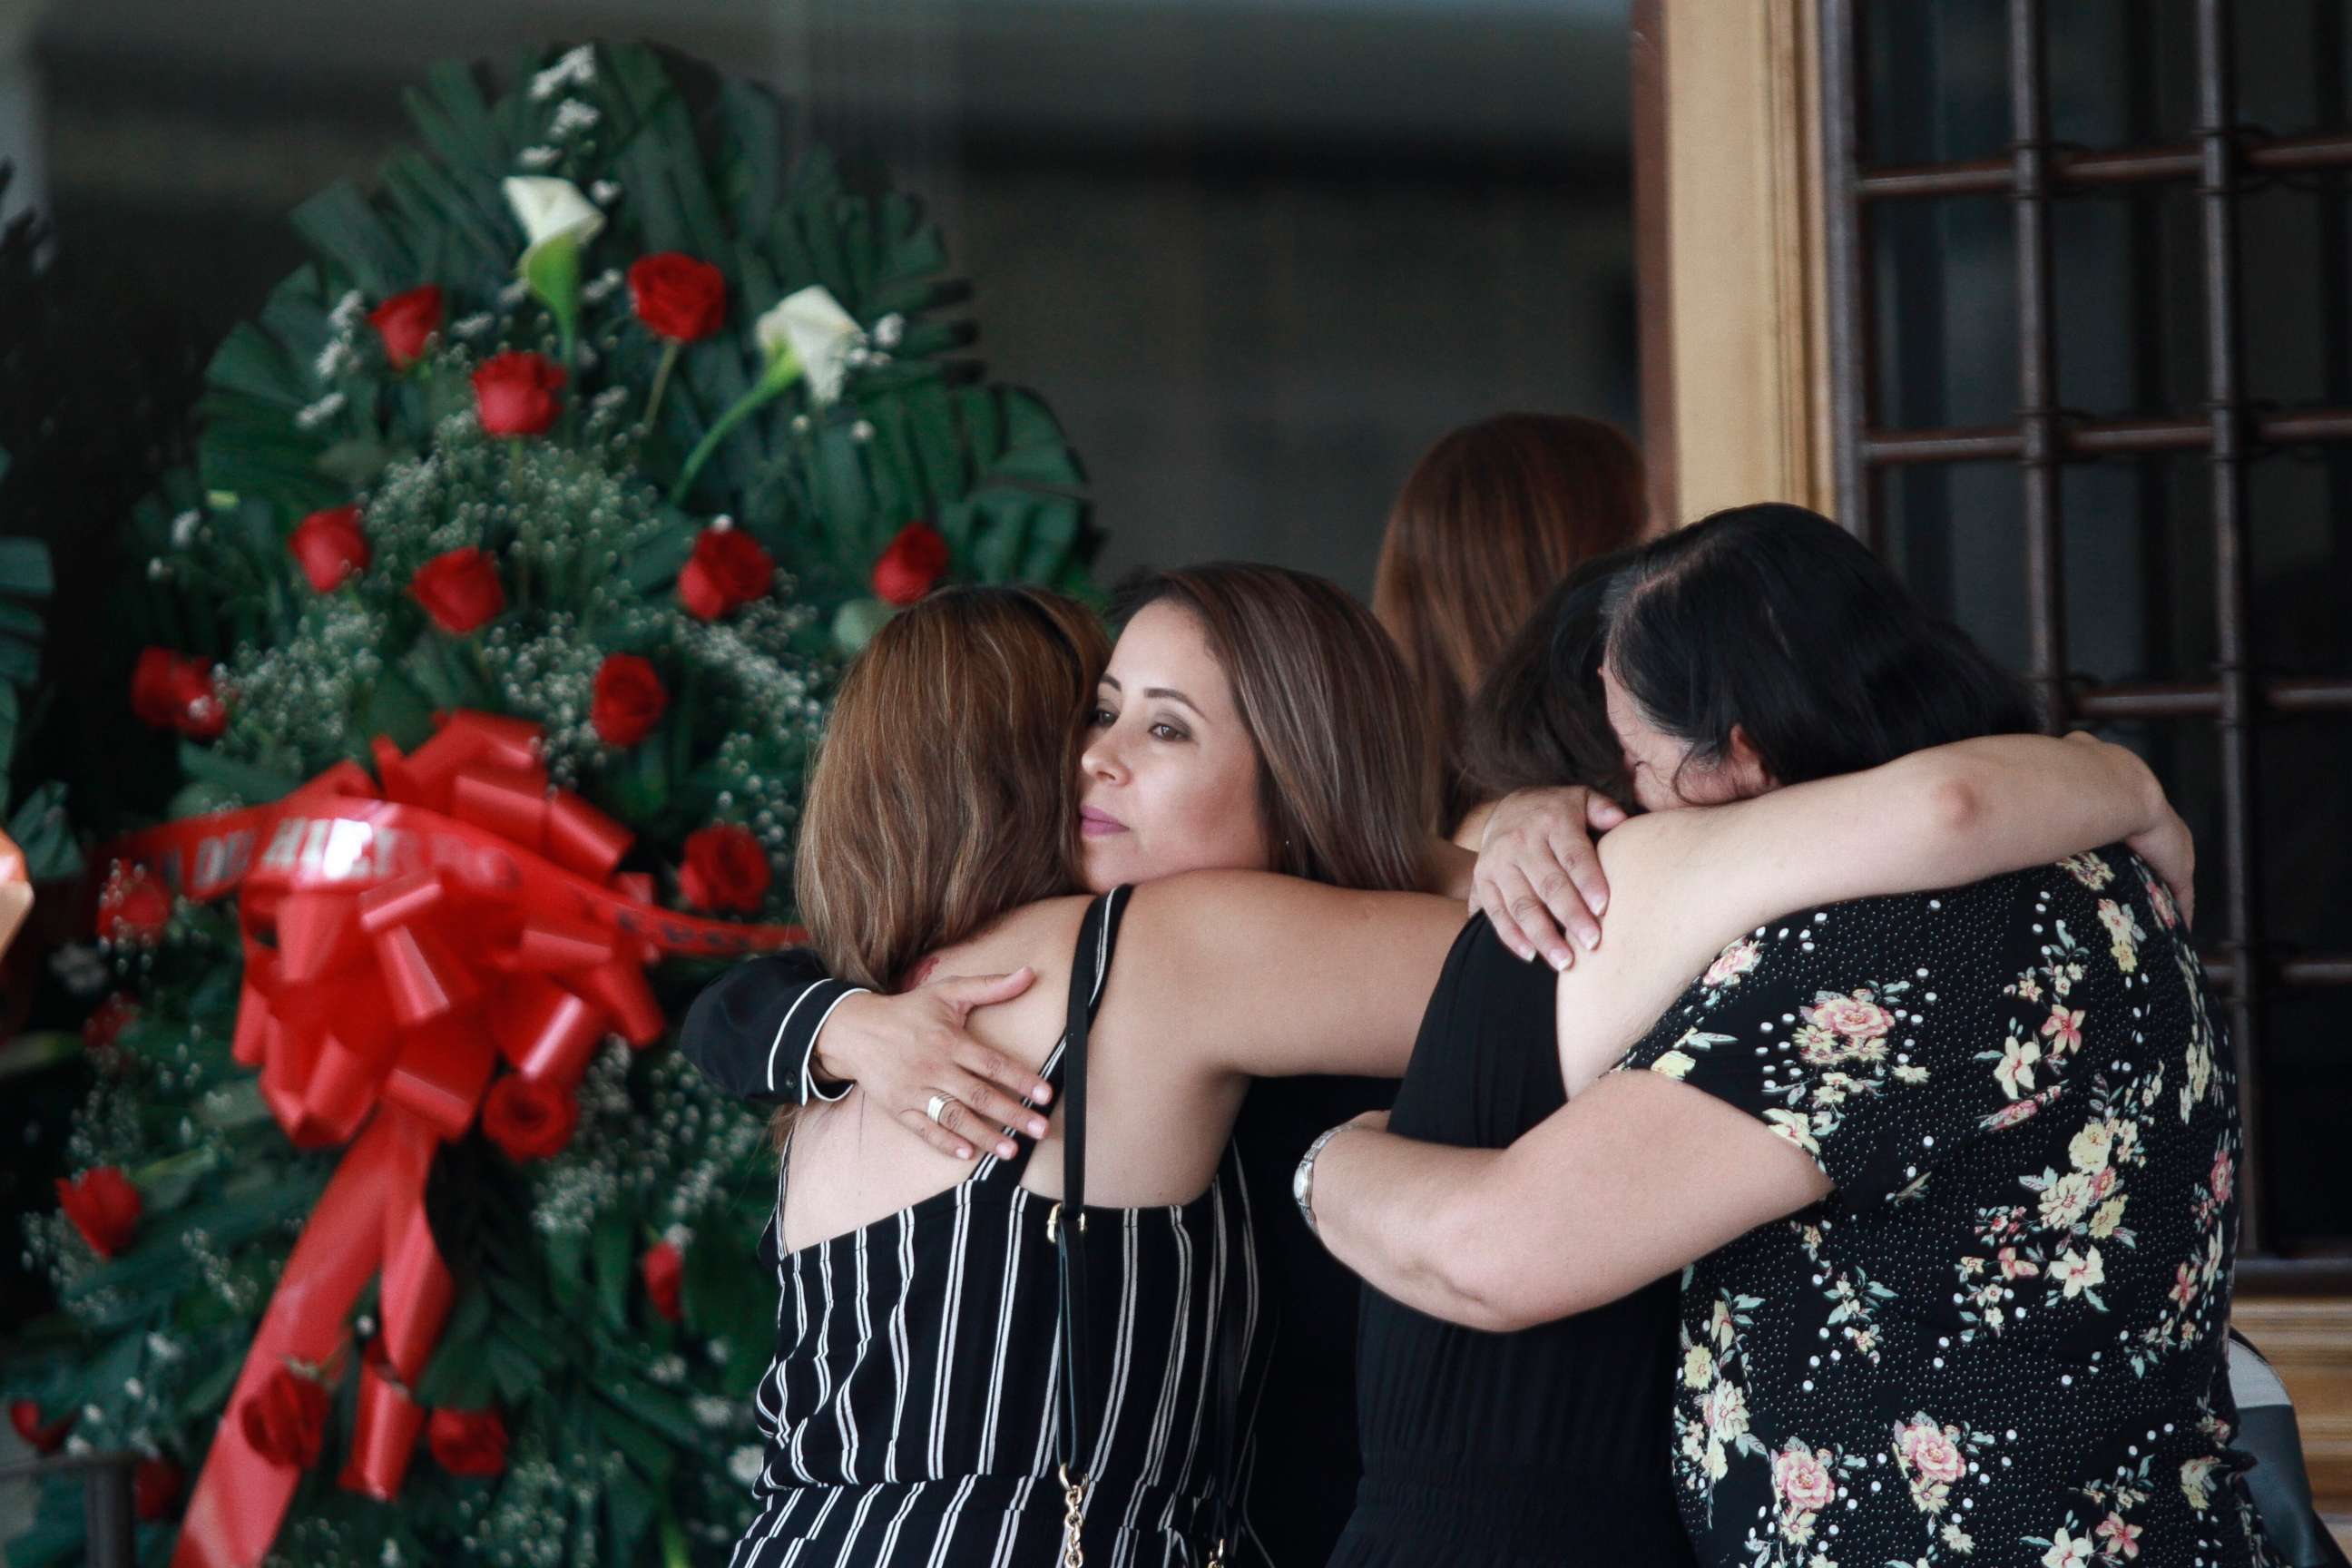 PHOTO: Tearful mourners hug outside a funeral home as they arrive to attend a wake for Elsa Mendoza, who was killed in the El Paso mass shooting, in Juarez, Mexico, Aug. 7, 2019. 